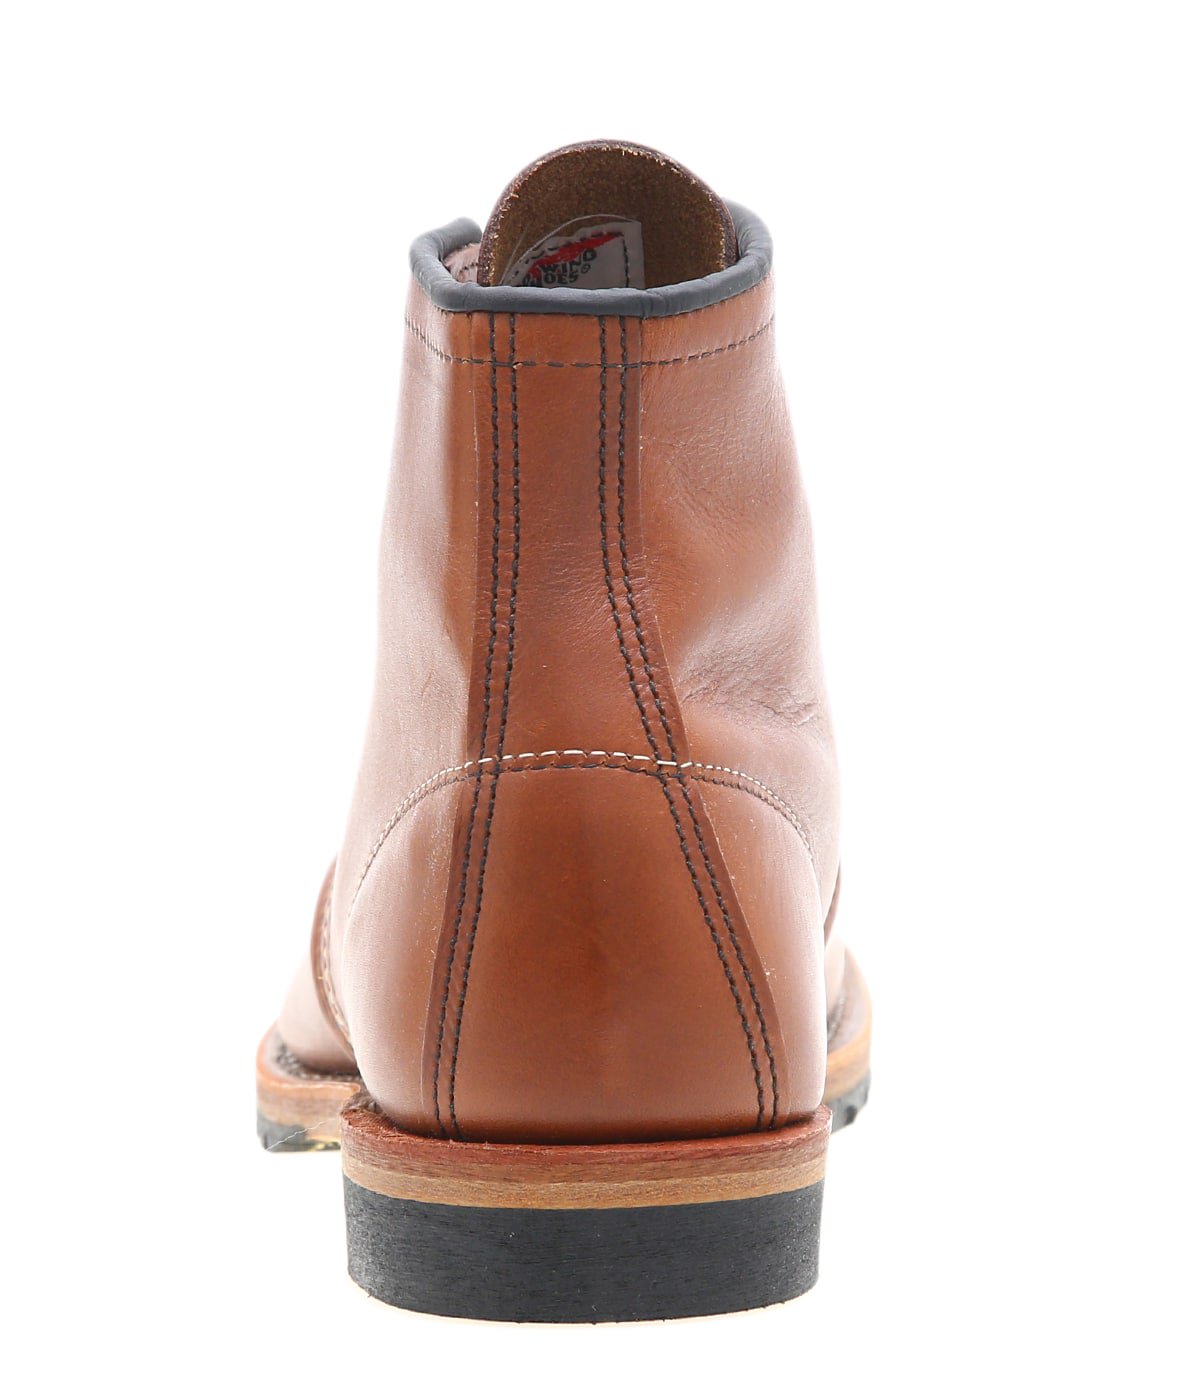 ROUND-TOE BECKMAN BOOTS STYLE NO.9016